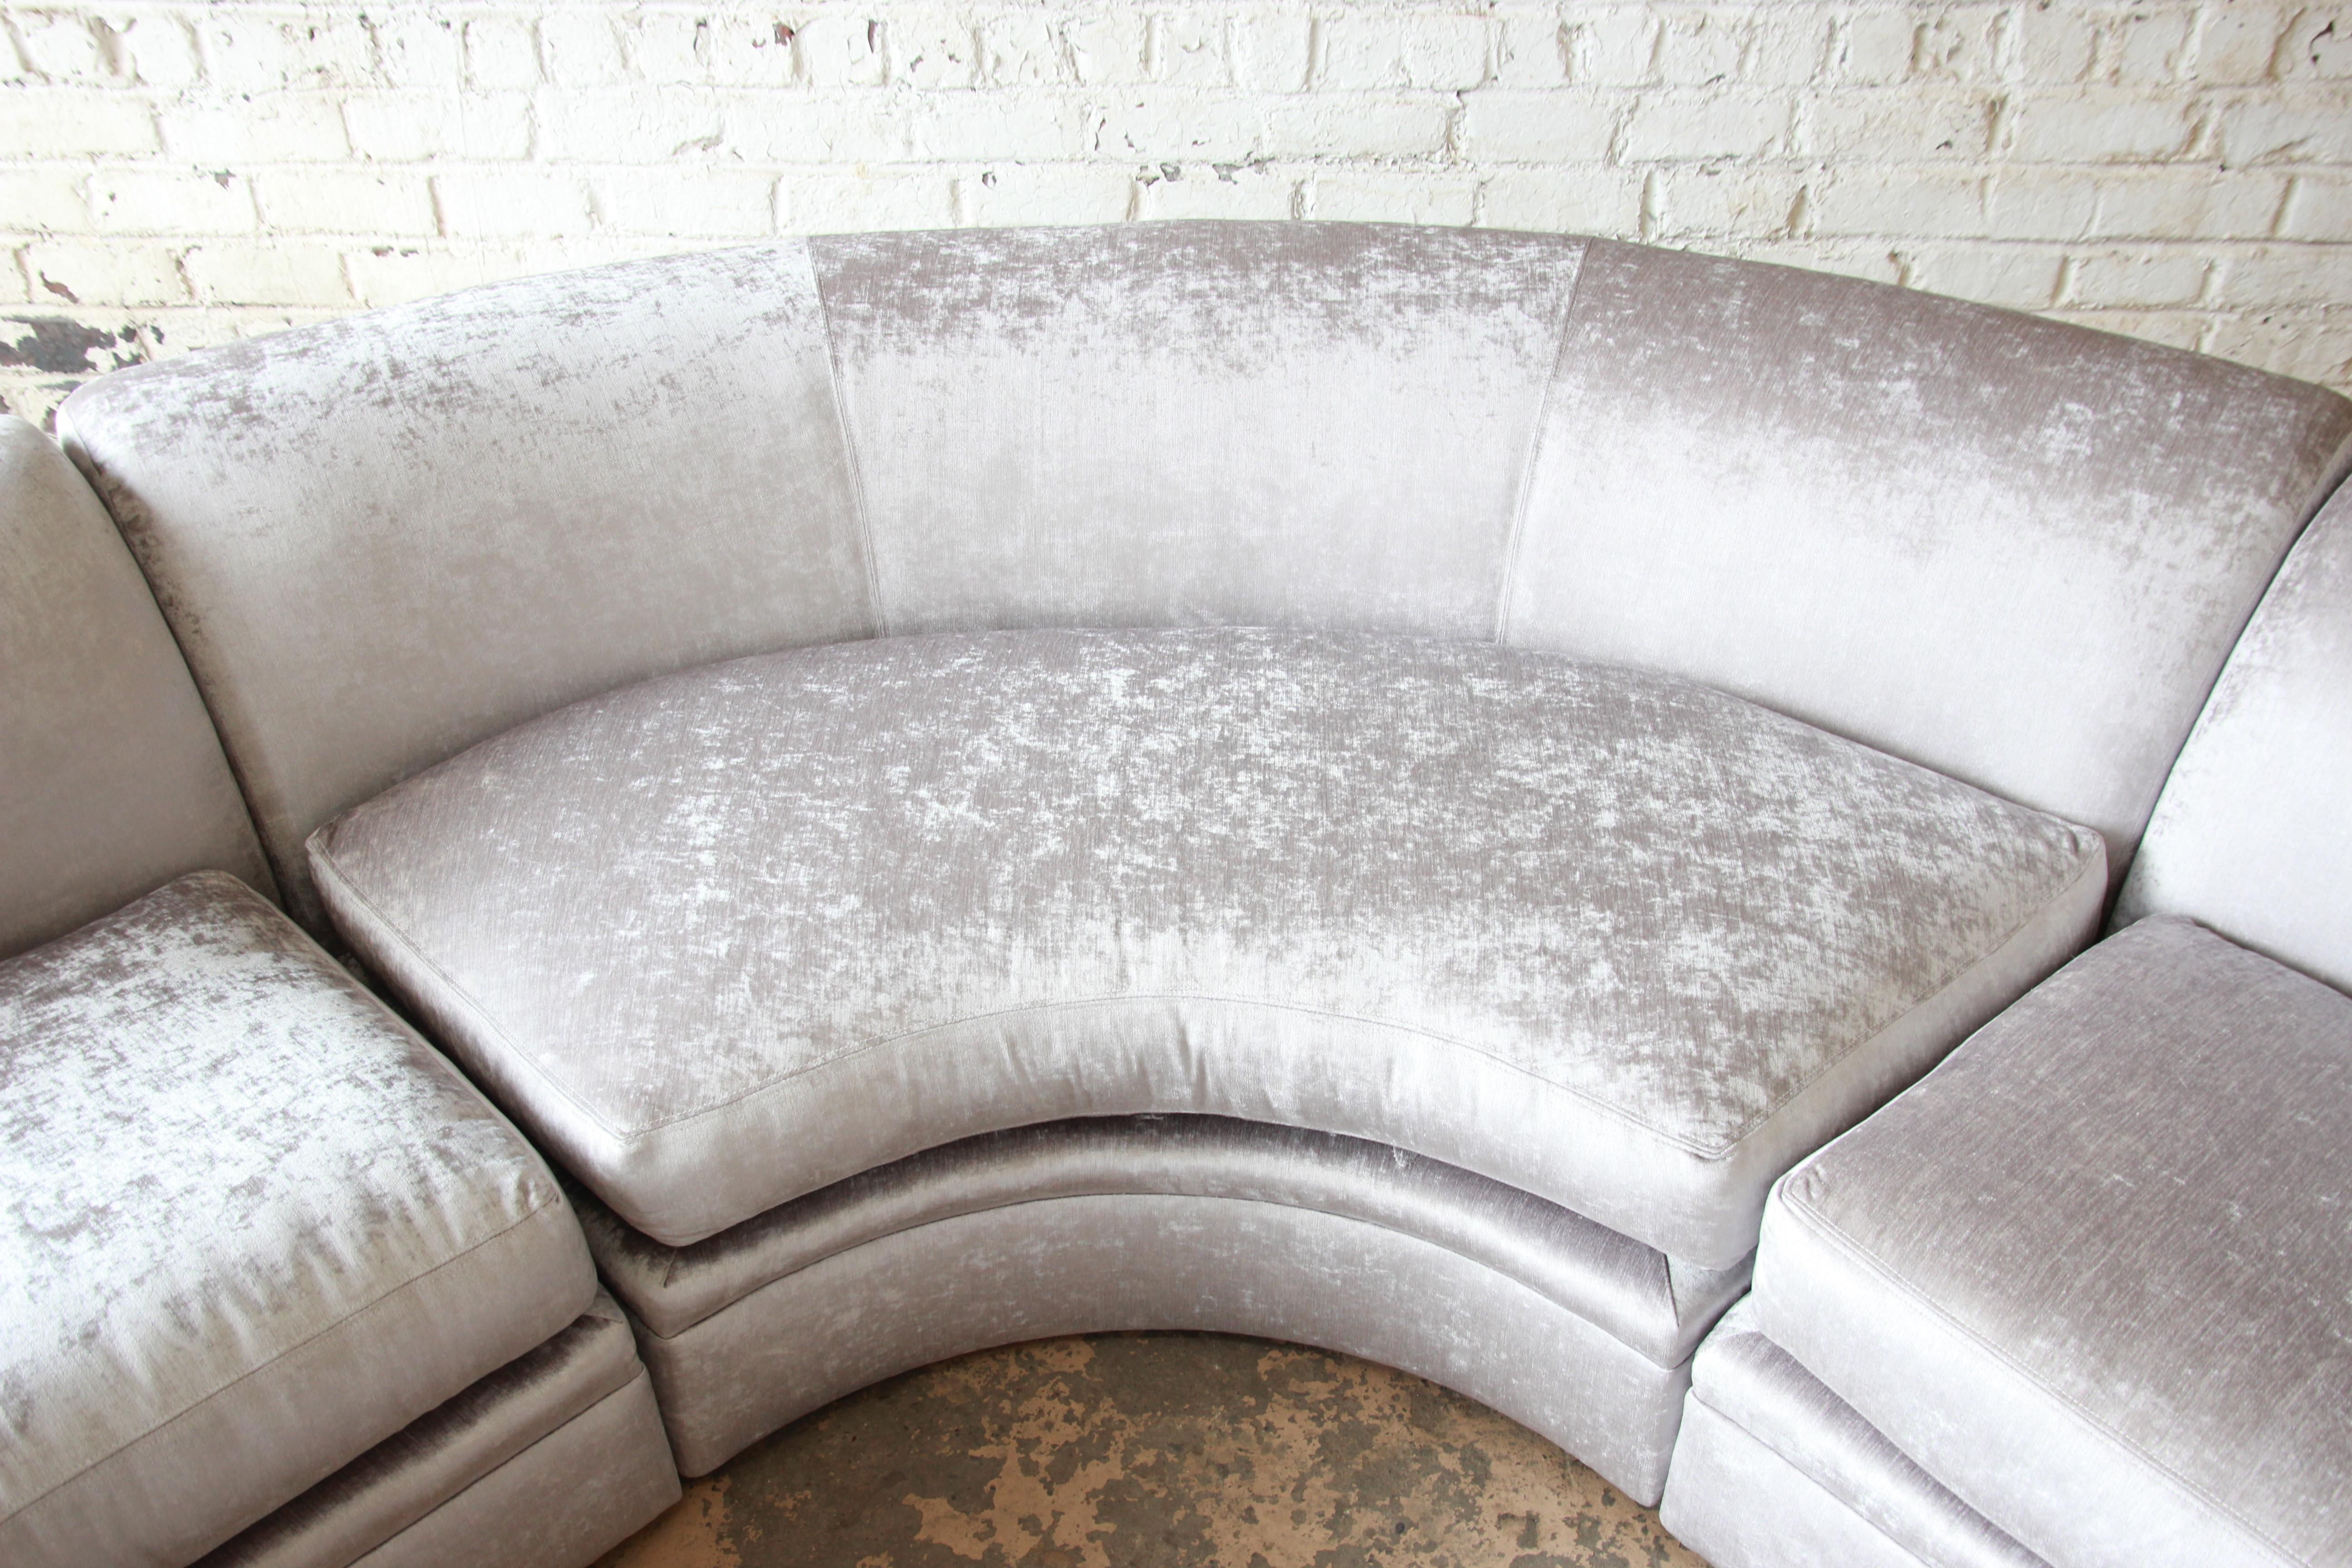 Late 20th Century Directional Three-Piece Sectional, Newly Reupholstered in Holly Hunt Velvet